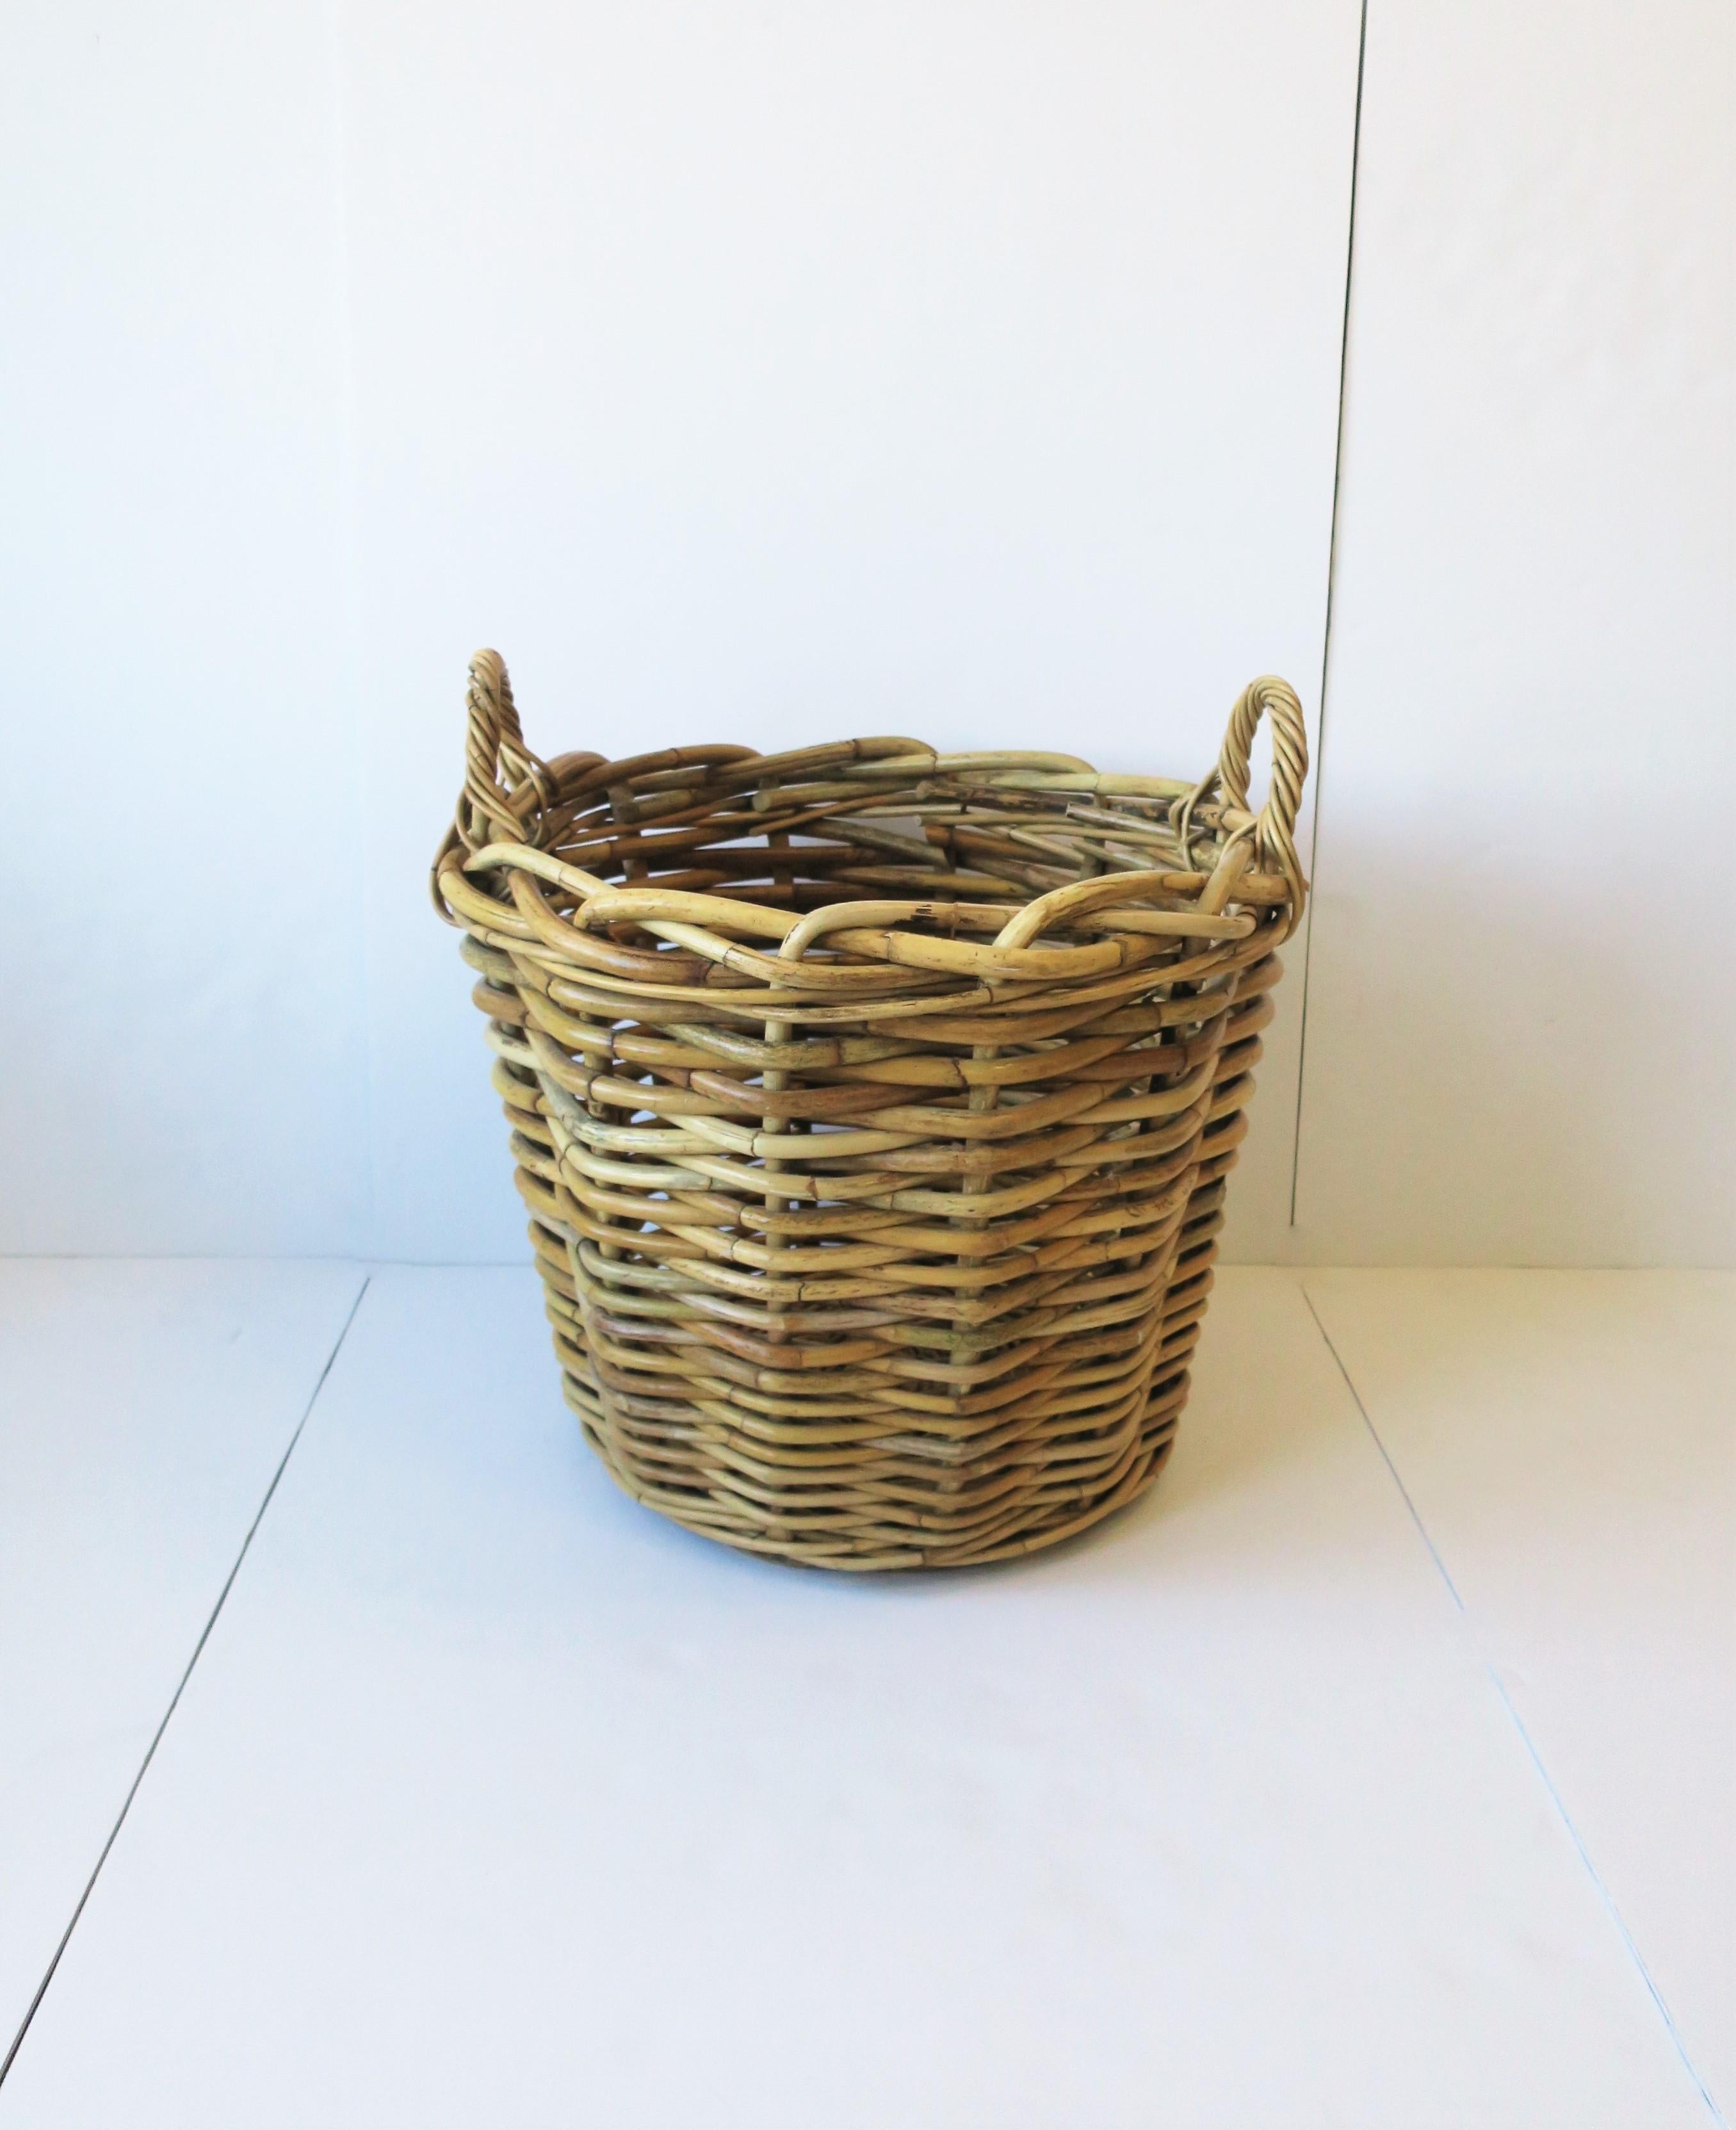 A substantial wicker rattan basket with loop handles, circa mid to late-20th century. Basket is strong and well made. Piece could work as a standalone decorative piece, to hold fresh rolled towels, for laundry, cachepot for plant pot, etc.